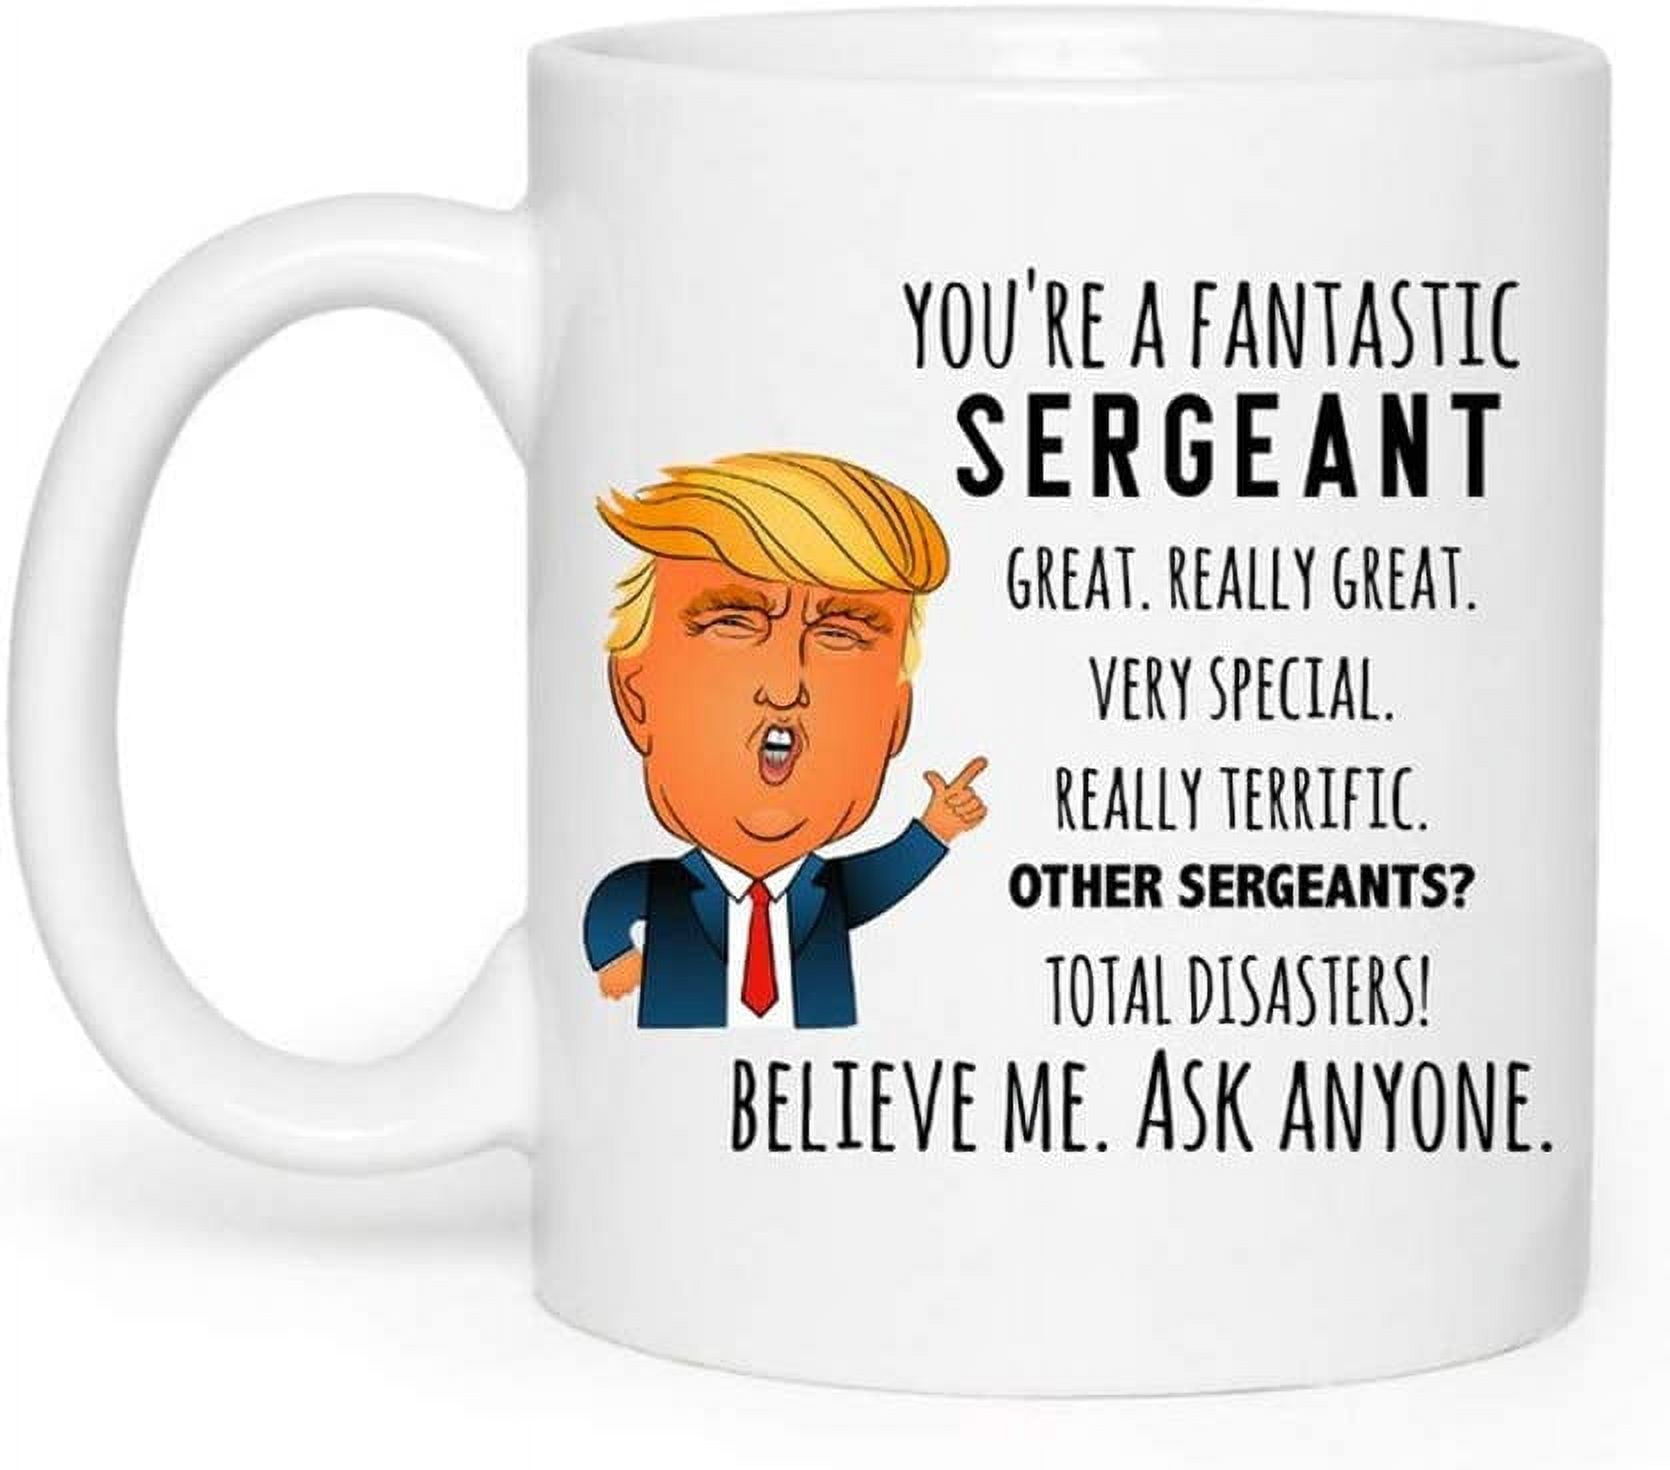 Cop Trump Coffee Mug, Funny Gift for Police Officer